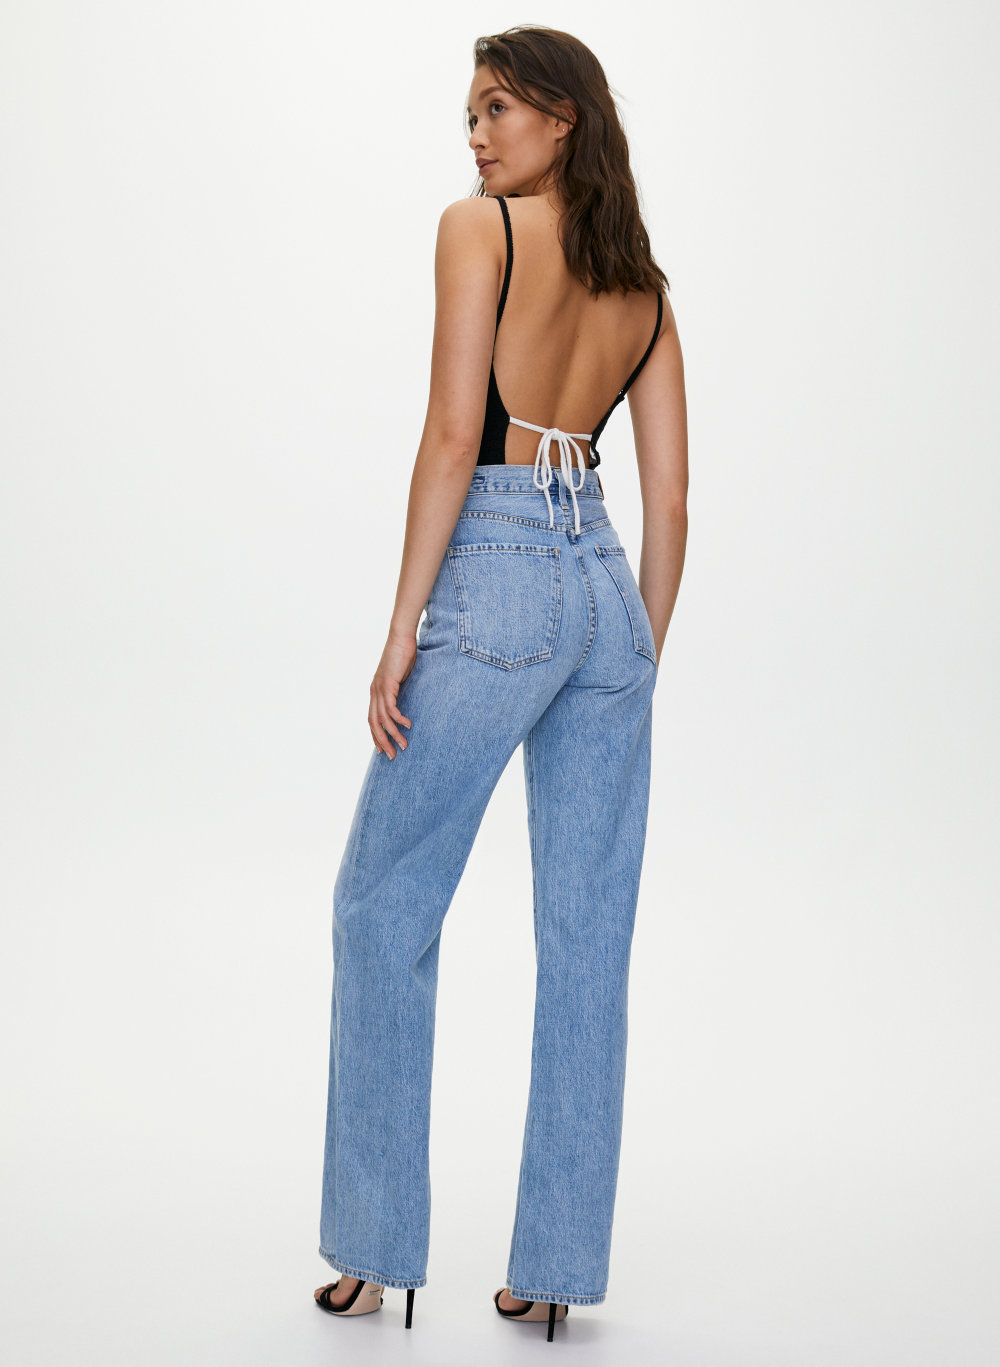 citizens of humanity annina trouser jeans